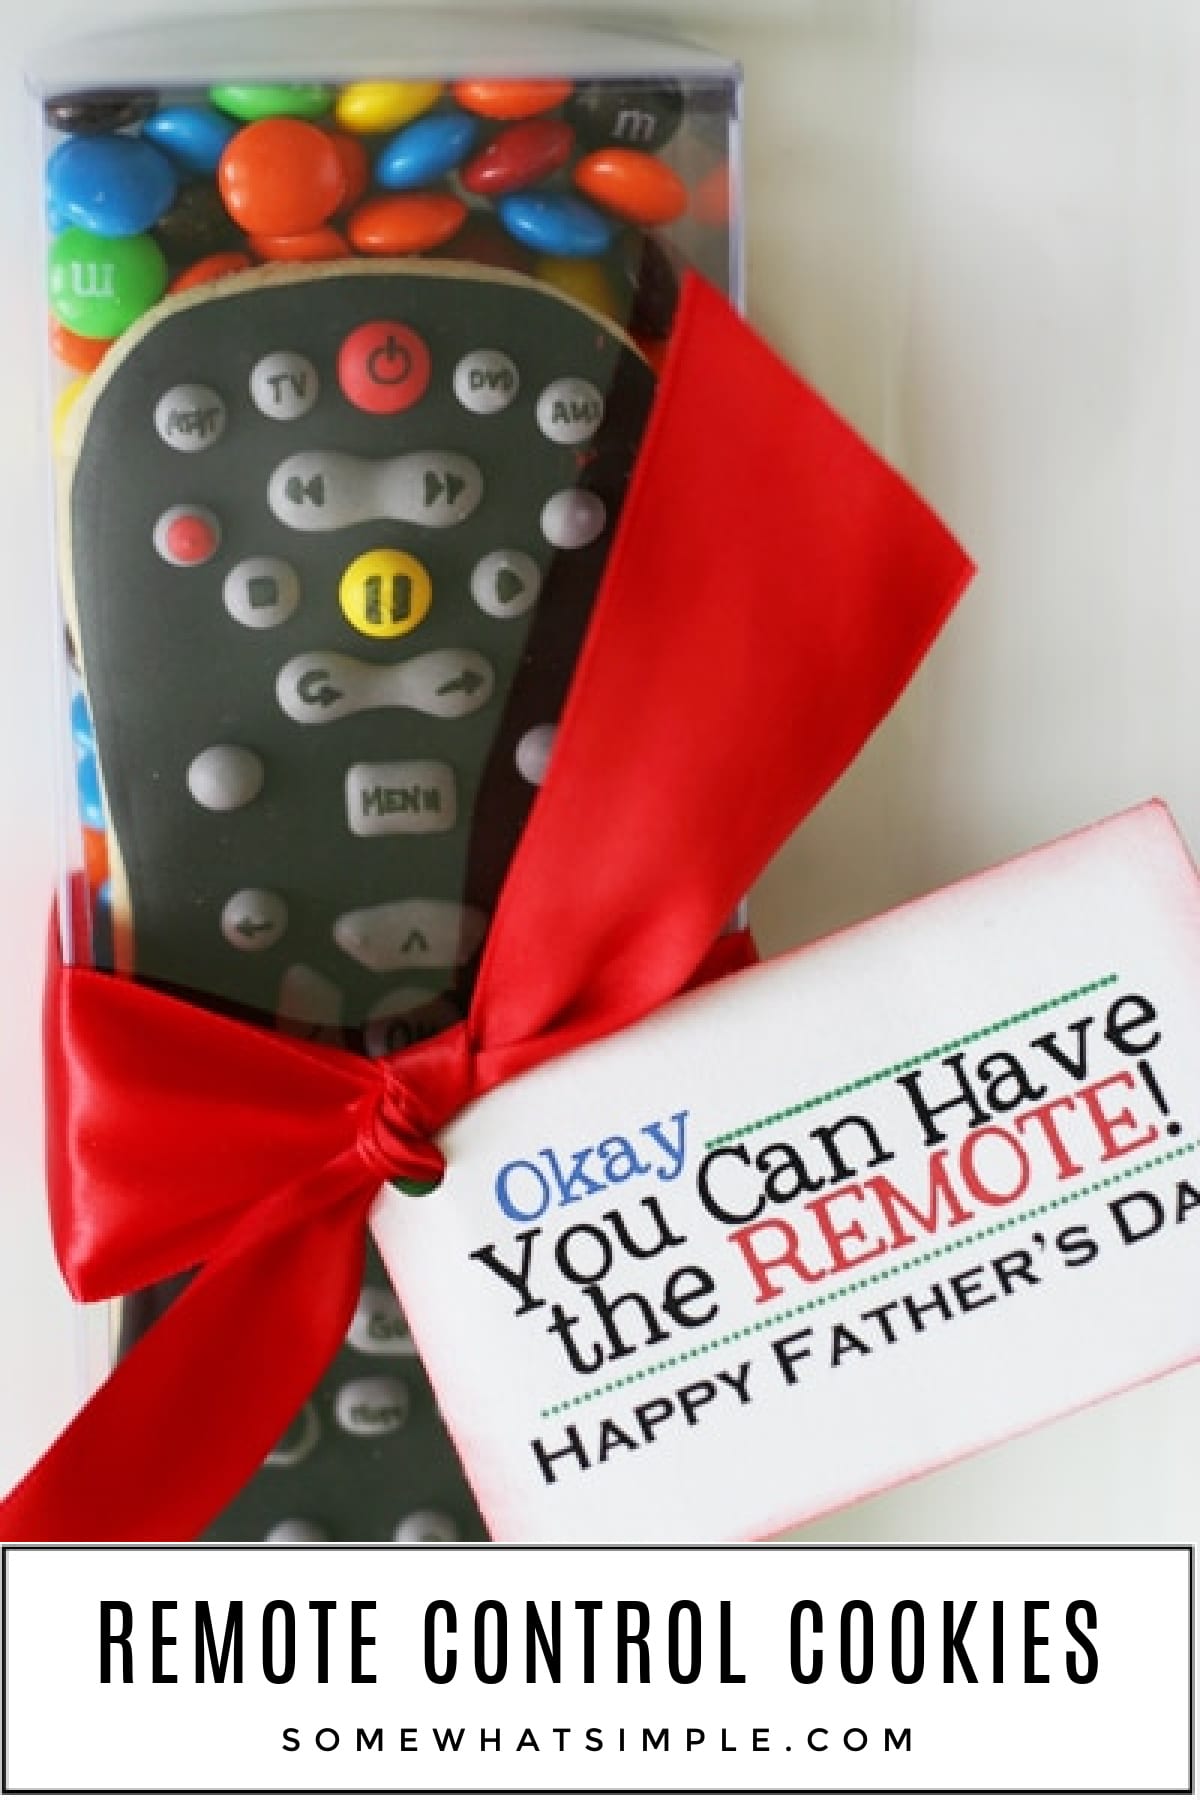 A fun gift that will surely make him smile, these Father's Day Cookies shaped like his TV remote control are both unique and delicious! via @somewhatsimple